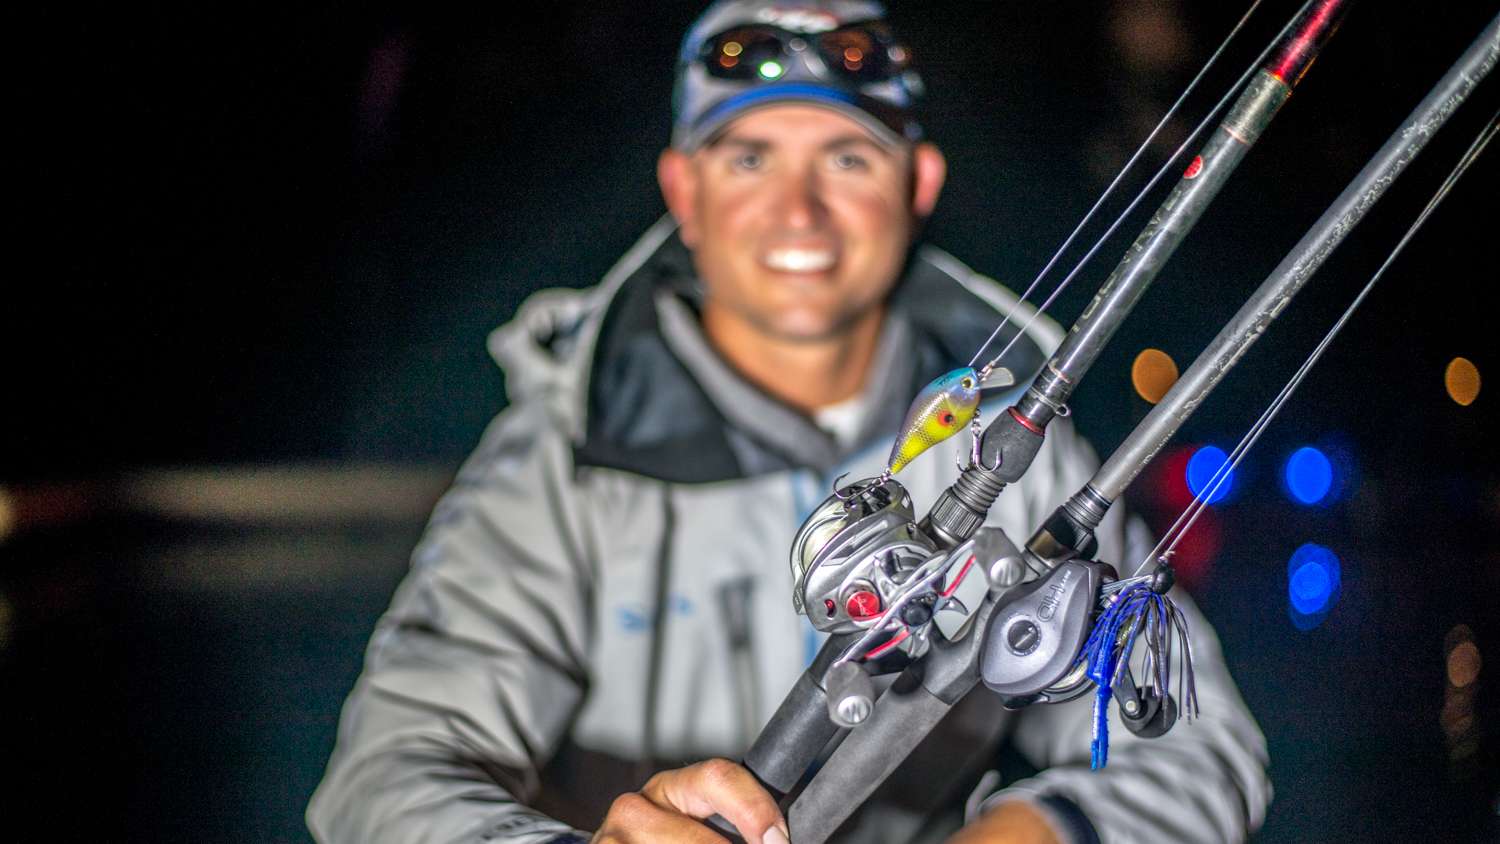 <b>Casey Ashley</b><br>
Casey Ashley finished 10th place after leading on Day 1. âI had a good area but with all the rain there was eventually too much current,â said the 2015 Bassmaster Classic champion. Initially, he caught bass behind the current breaks of sandy points used by the bass to ambush baitfish in open water. His lure choice was a blue/chartreuse Livingston Lures Howeller Dream Master SQ, a square-billed crankbait. When the action slowed in the post-frontal conditions he switched to a Zoom Bait Co. Z-Craw Jr., alternating between Black Light and Black Sapphire colors. He Texas-rigged the bait to a 3/0 Mustad UltraPoint Flippinâ Hook with 3/8-ounce worm weight. Edges of mixed aquatic vegetation were lure targets in water up to 2 feet deep.  